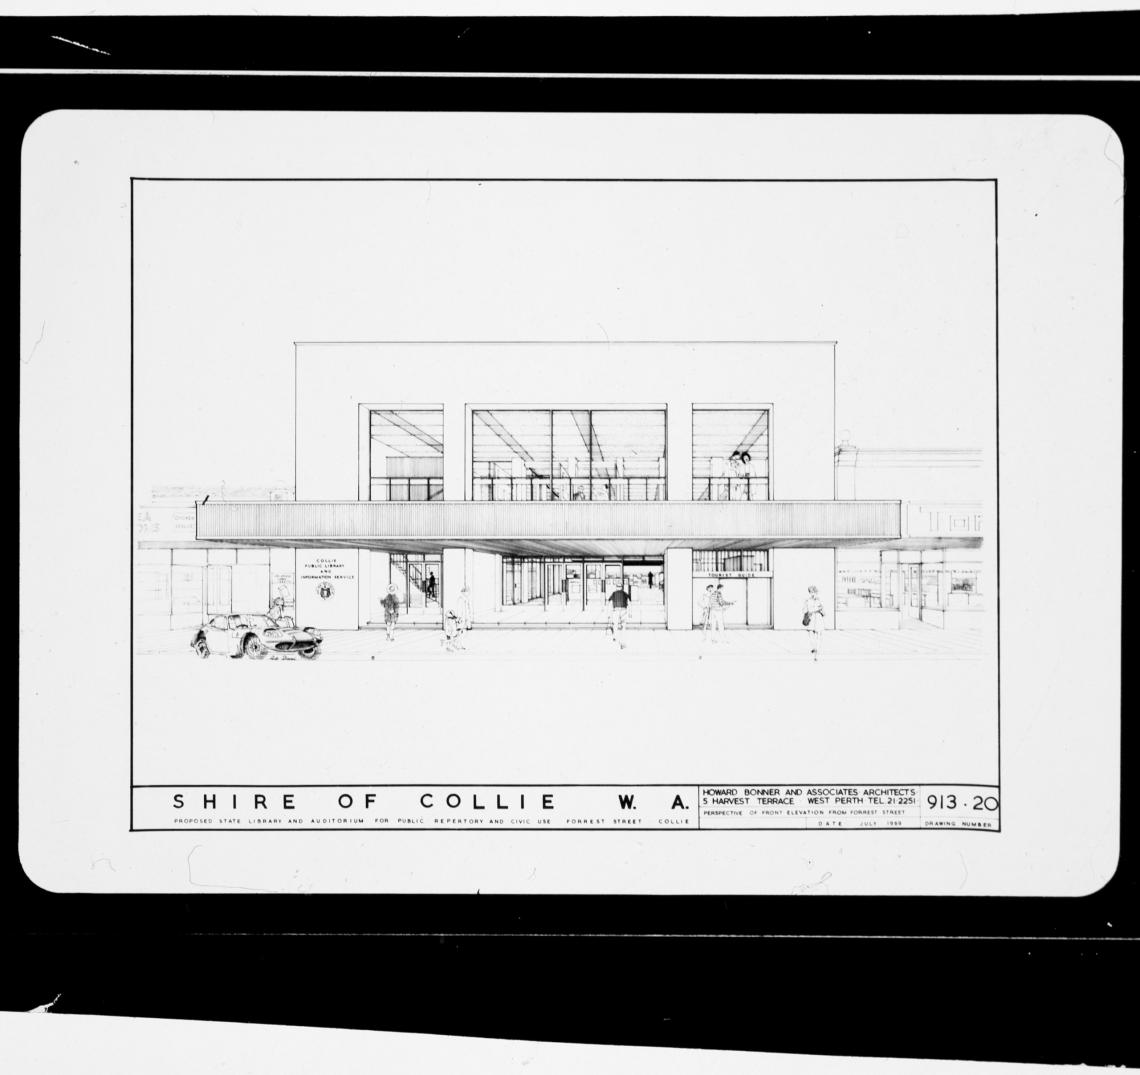 Plans for the new Collie Public Library 1969